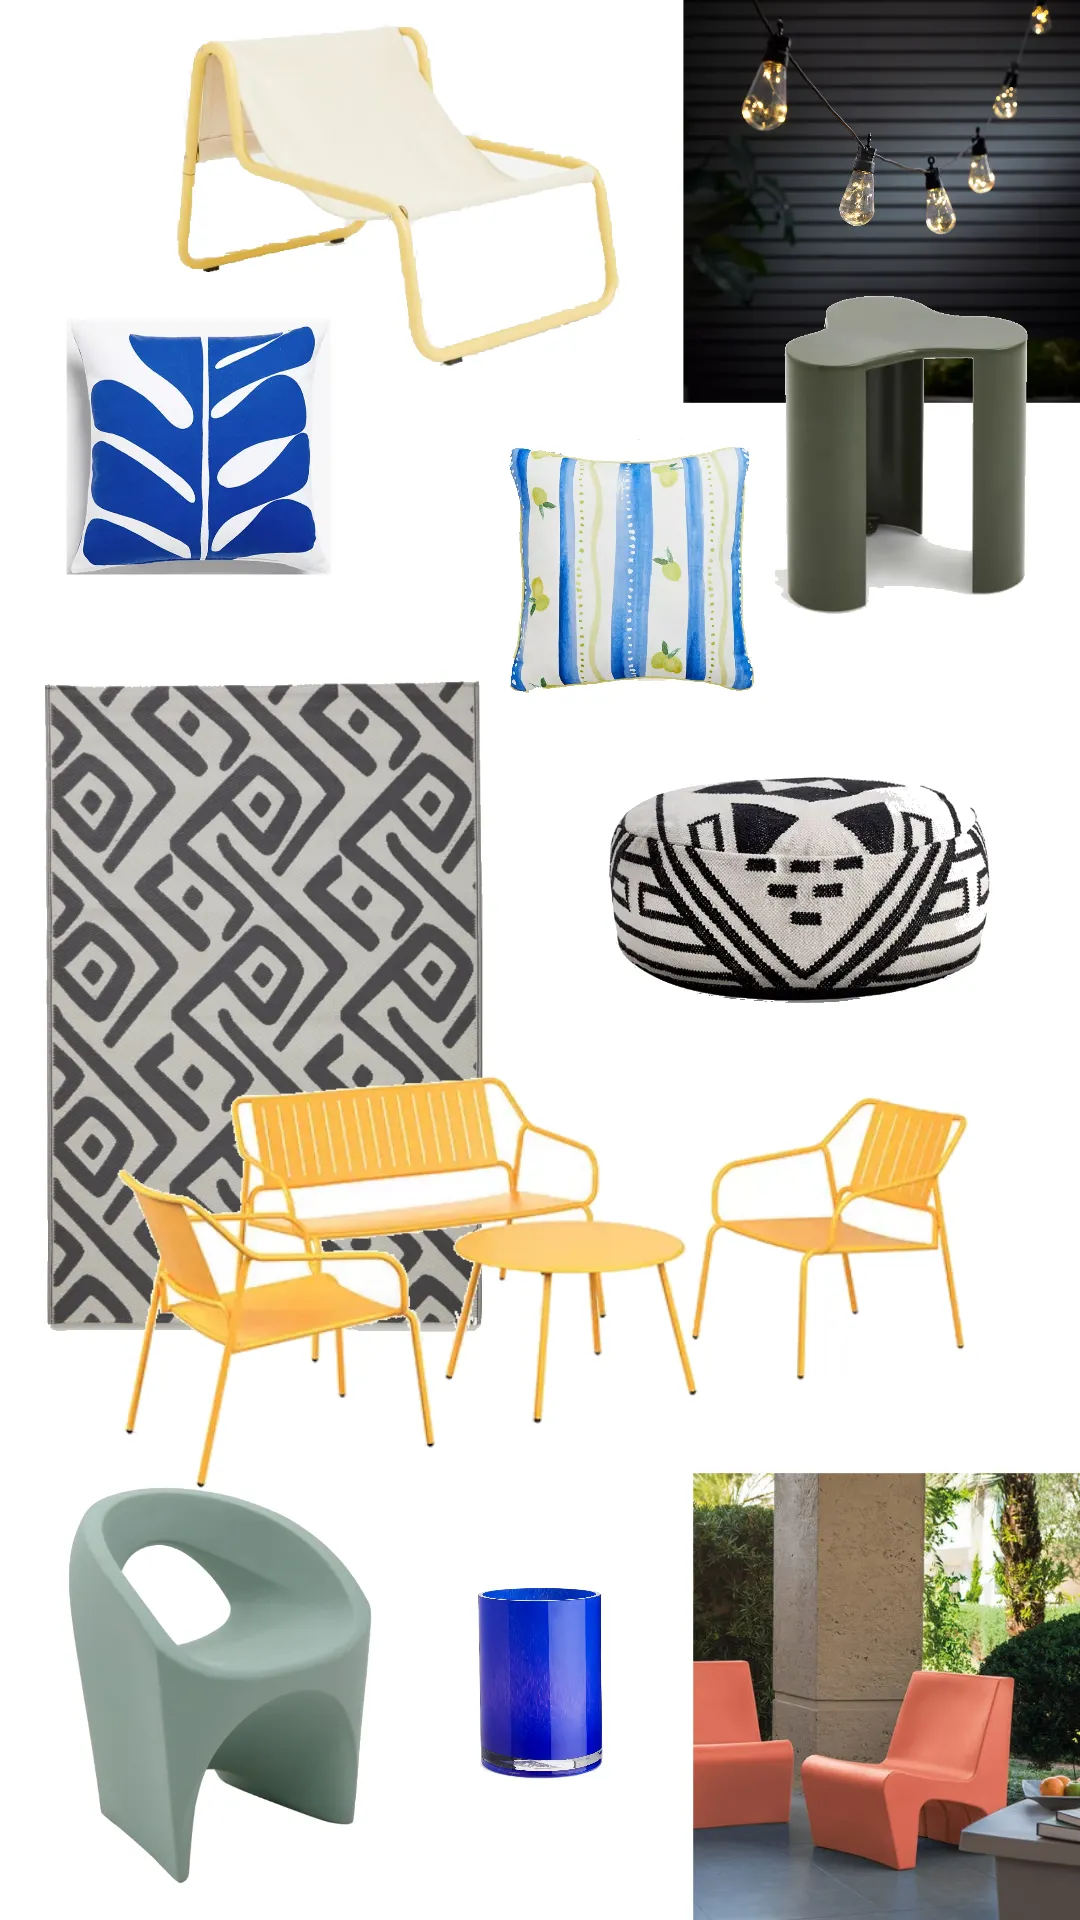 A BOLD & BRIGHT OUTDOOR UPDATE